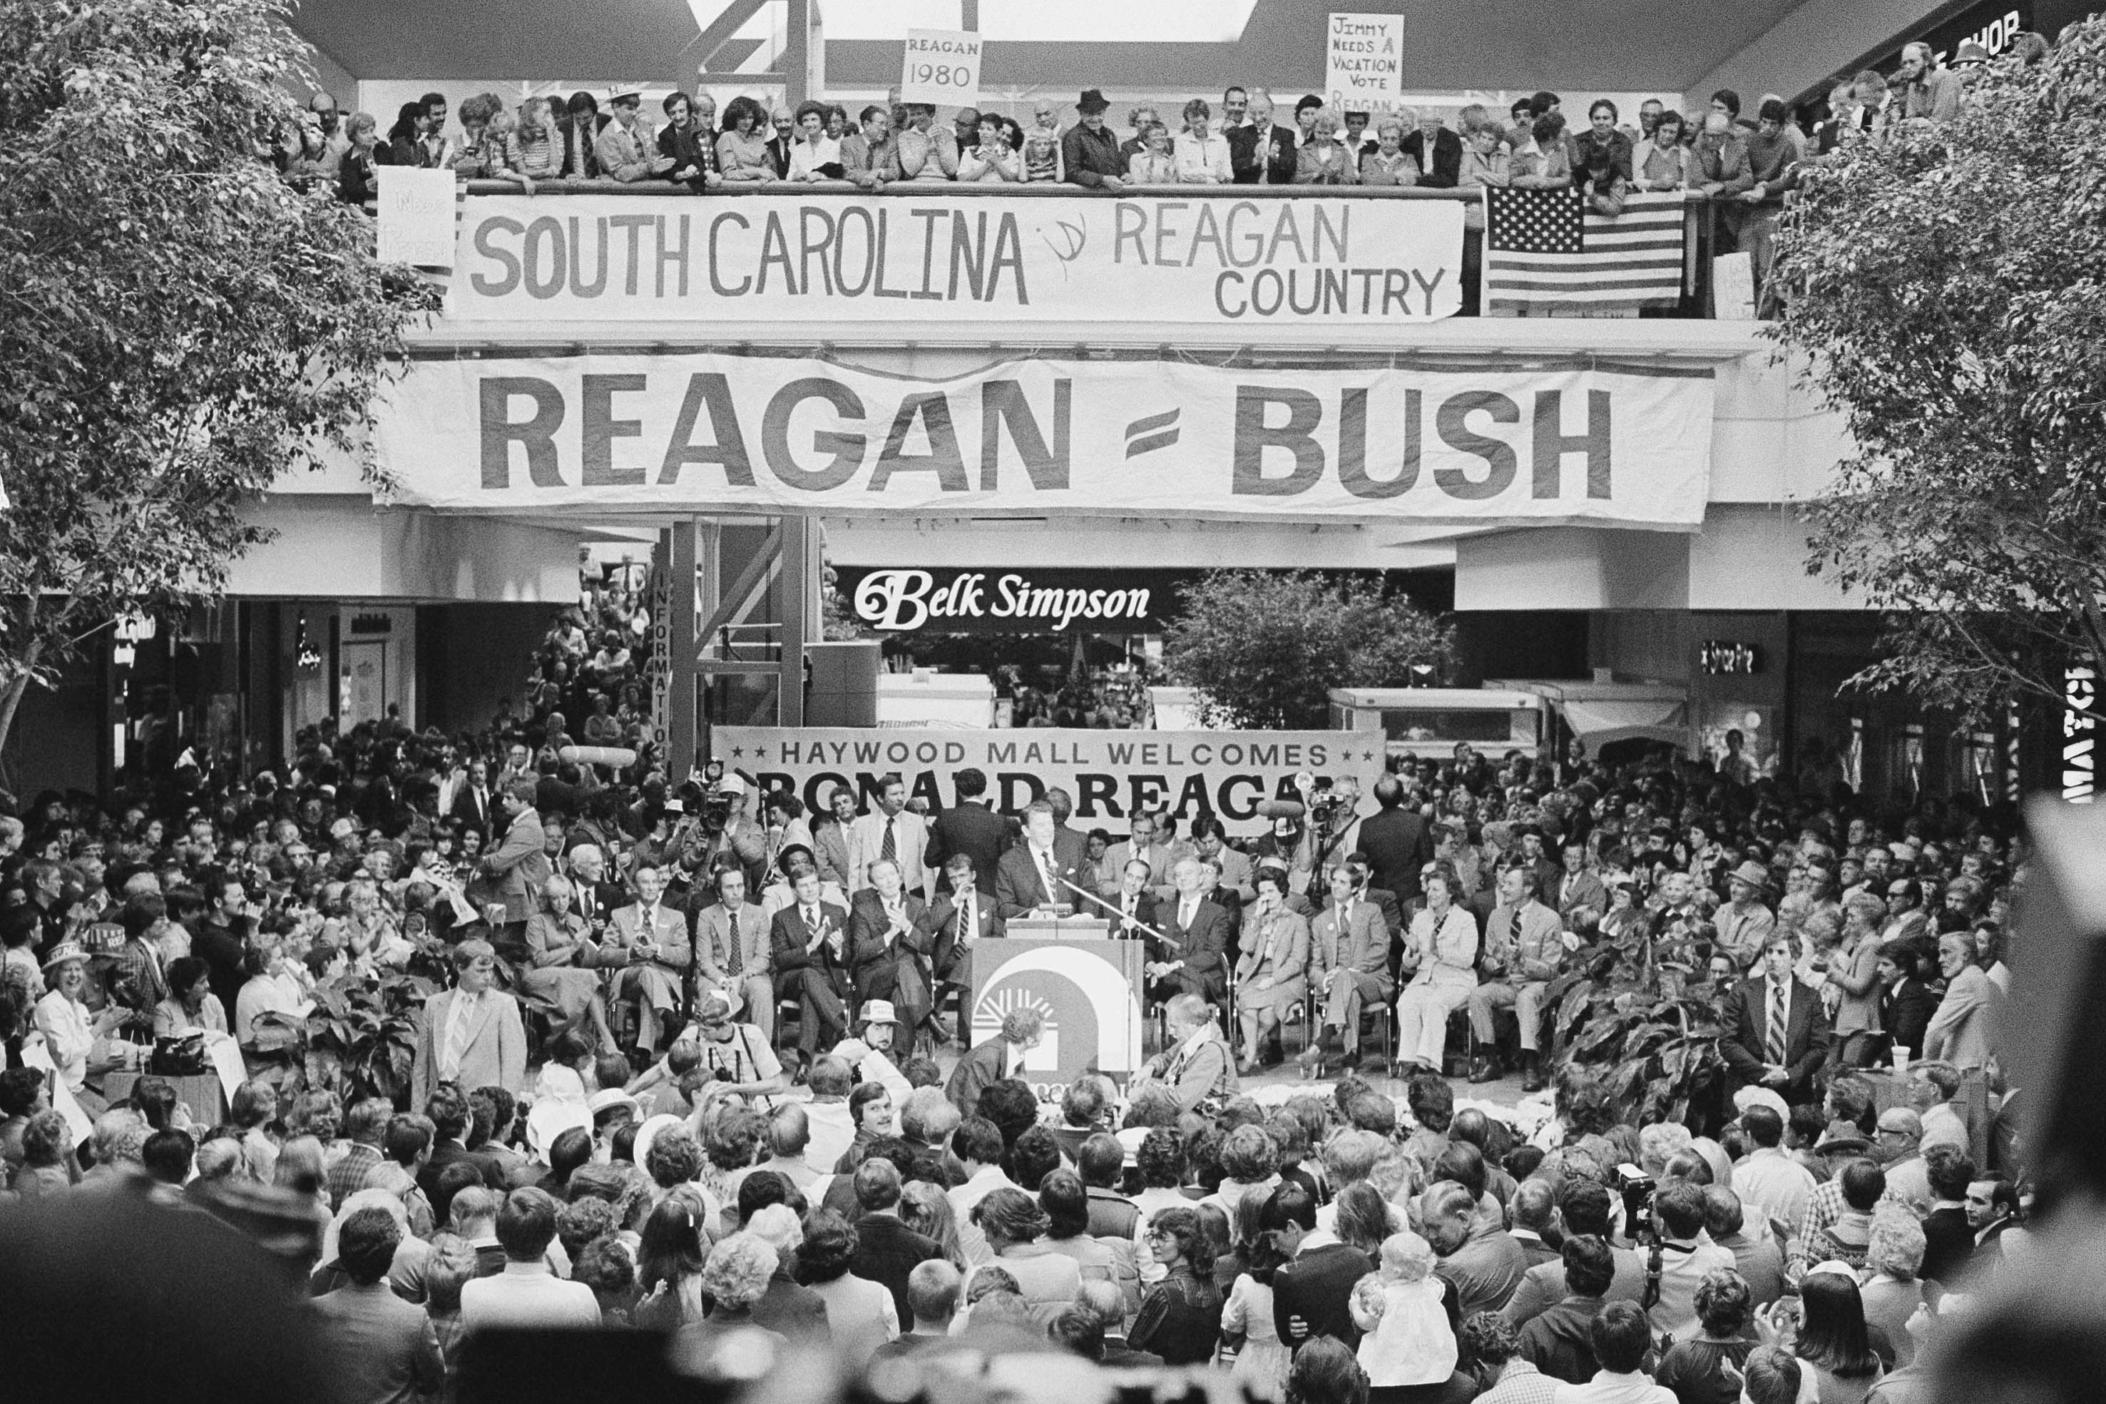 Republican party presidential candidate Ronald Reagan, at podium, delivers a campaign speech at a shopping mall in Greenville, South Carolina, on Oct. 23, 1980. (AP Photo)